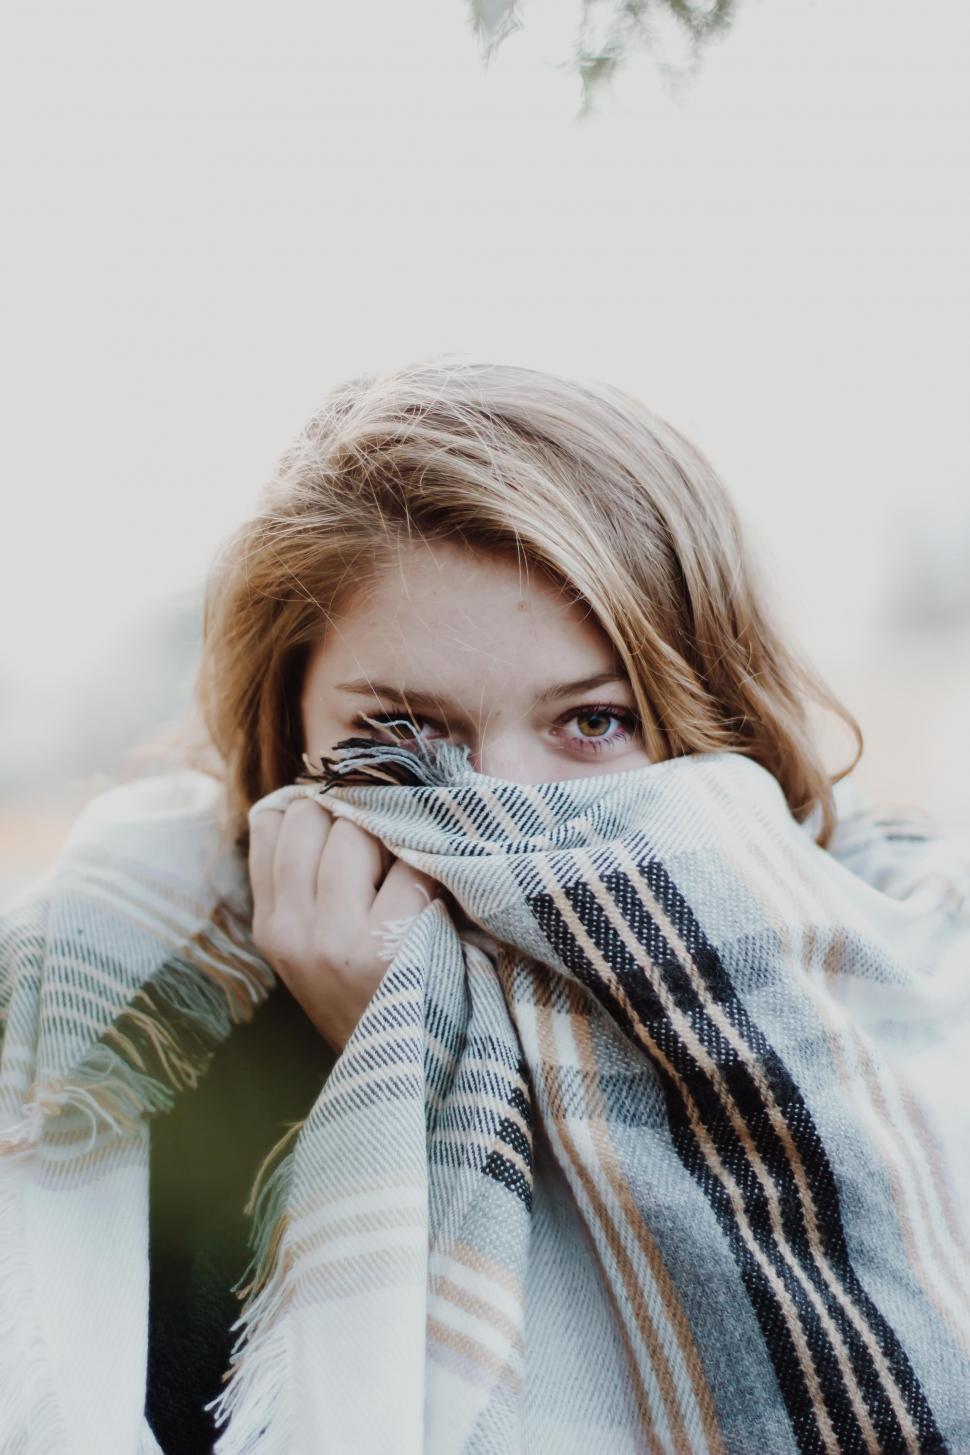 Free Image of Woman Covering Face With Blanket 